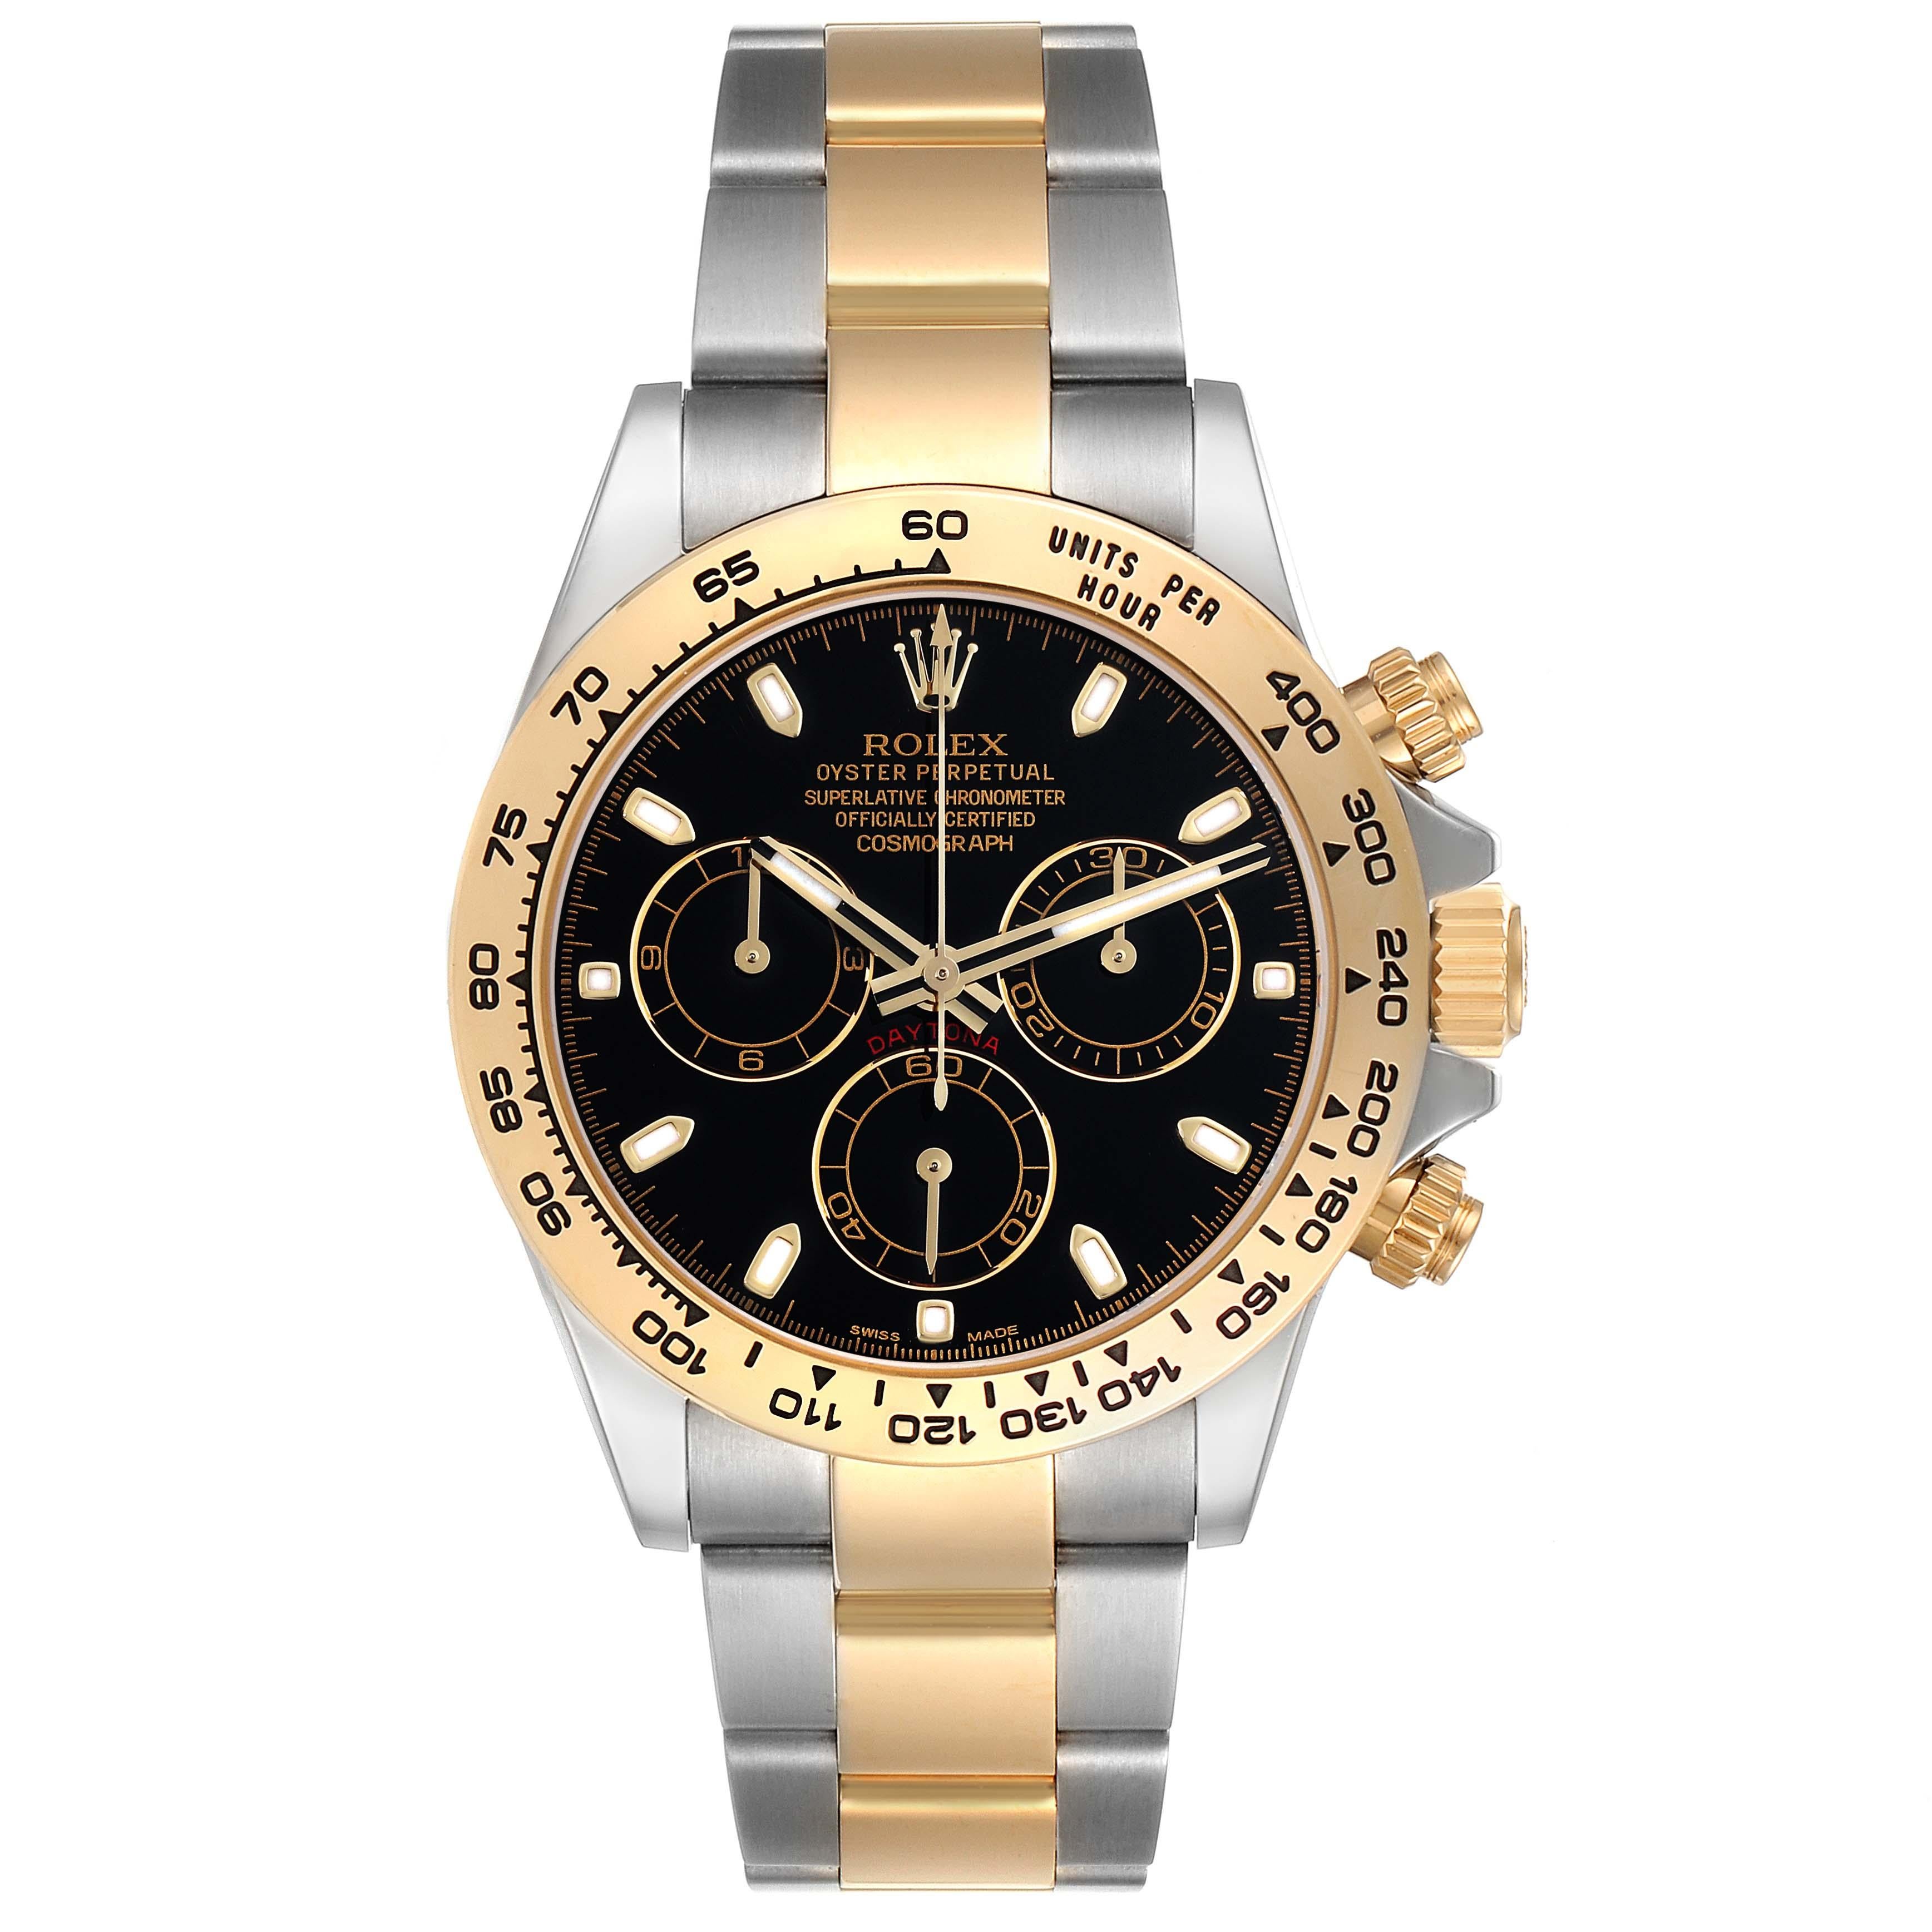 Rolex Cosmograph Daytona Steel Yellow Gold Black Dial Mens Watch 116503 Box Card. Officially certified chronometer automatic self-winding movement. Rhodium-plated, oeil-de-perdrix decoration, straight line lever escapement, monometallic balance